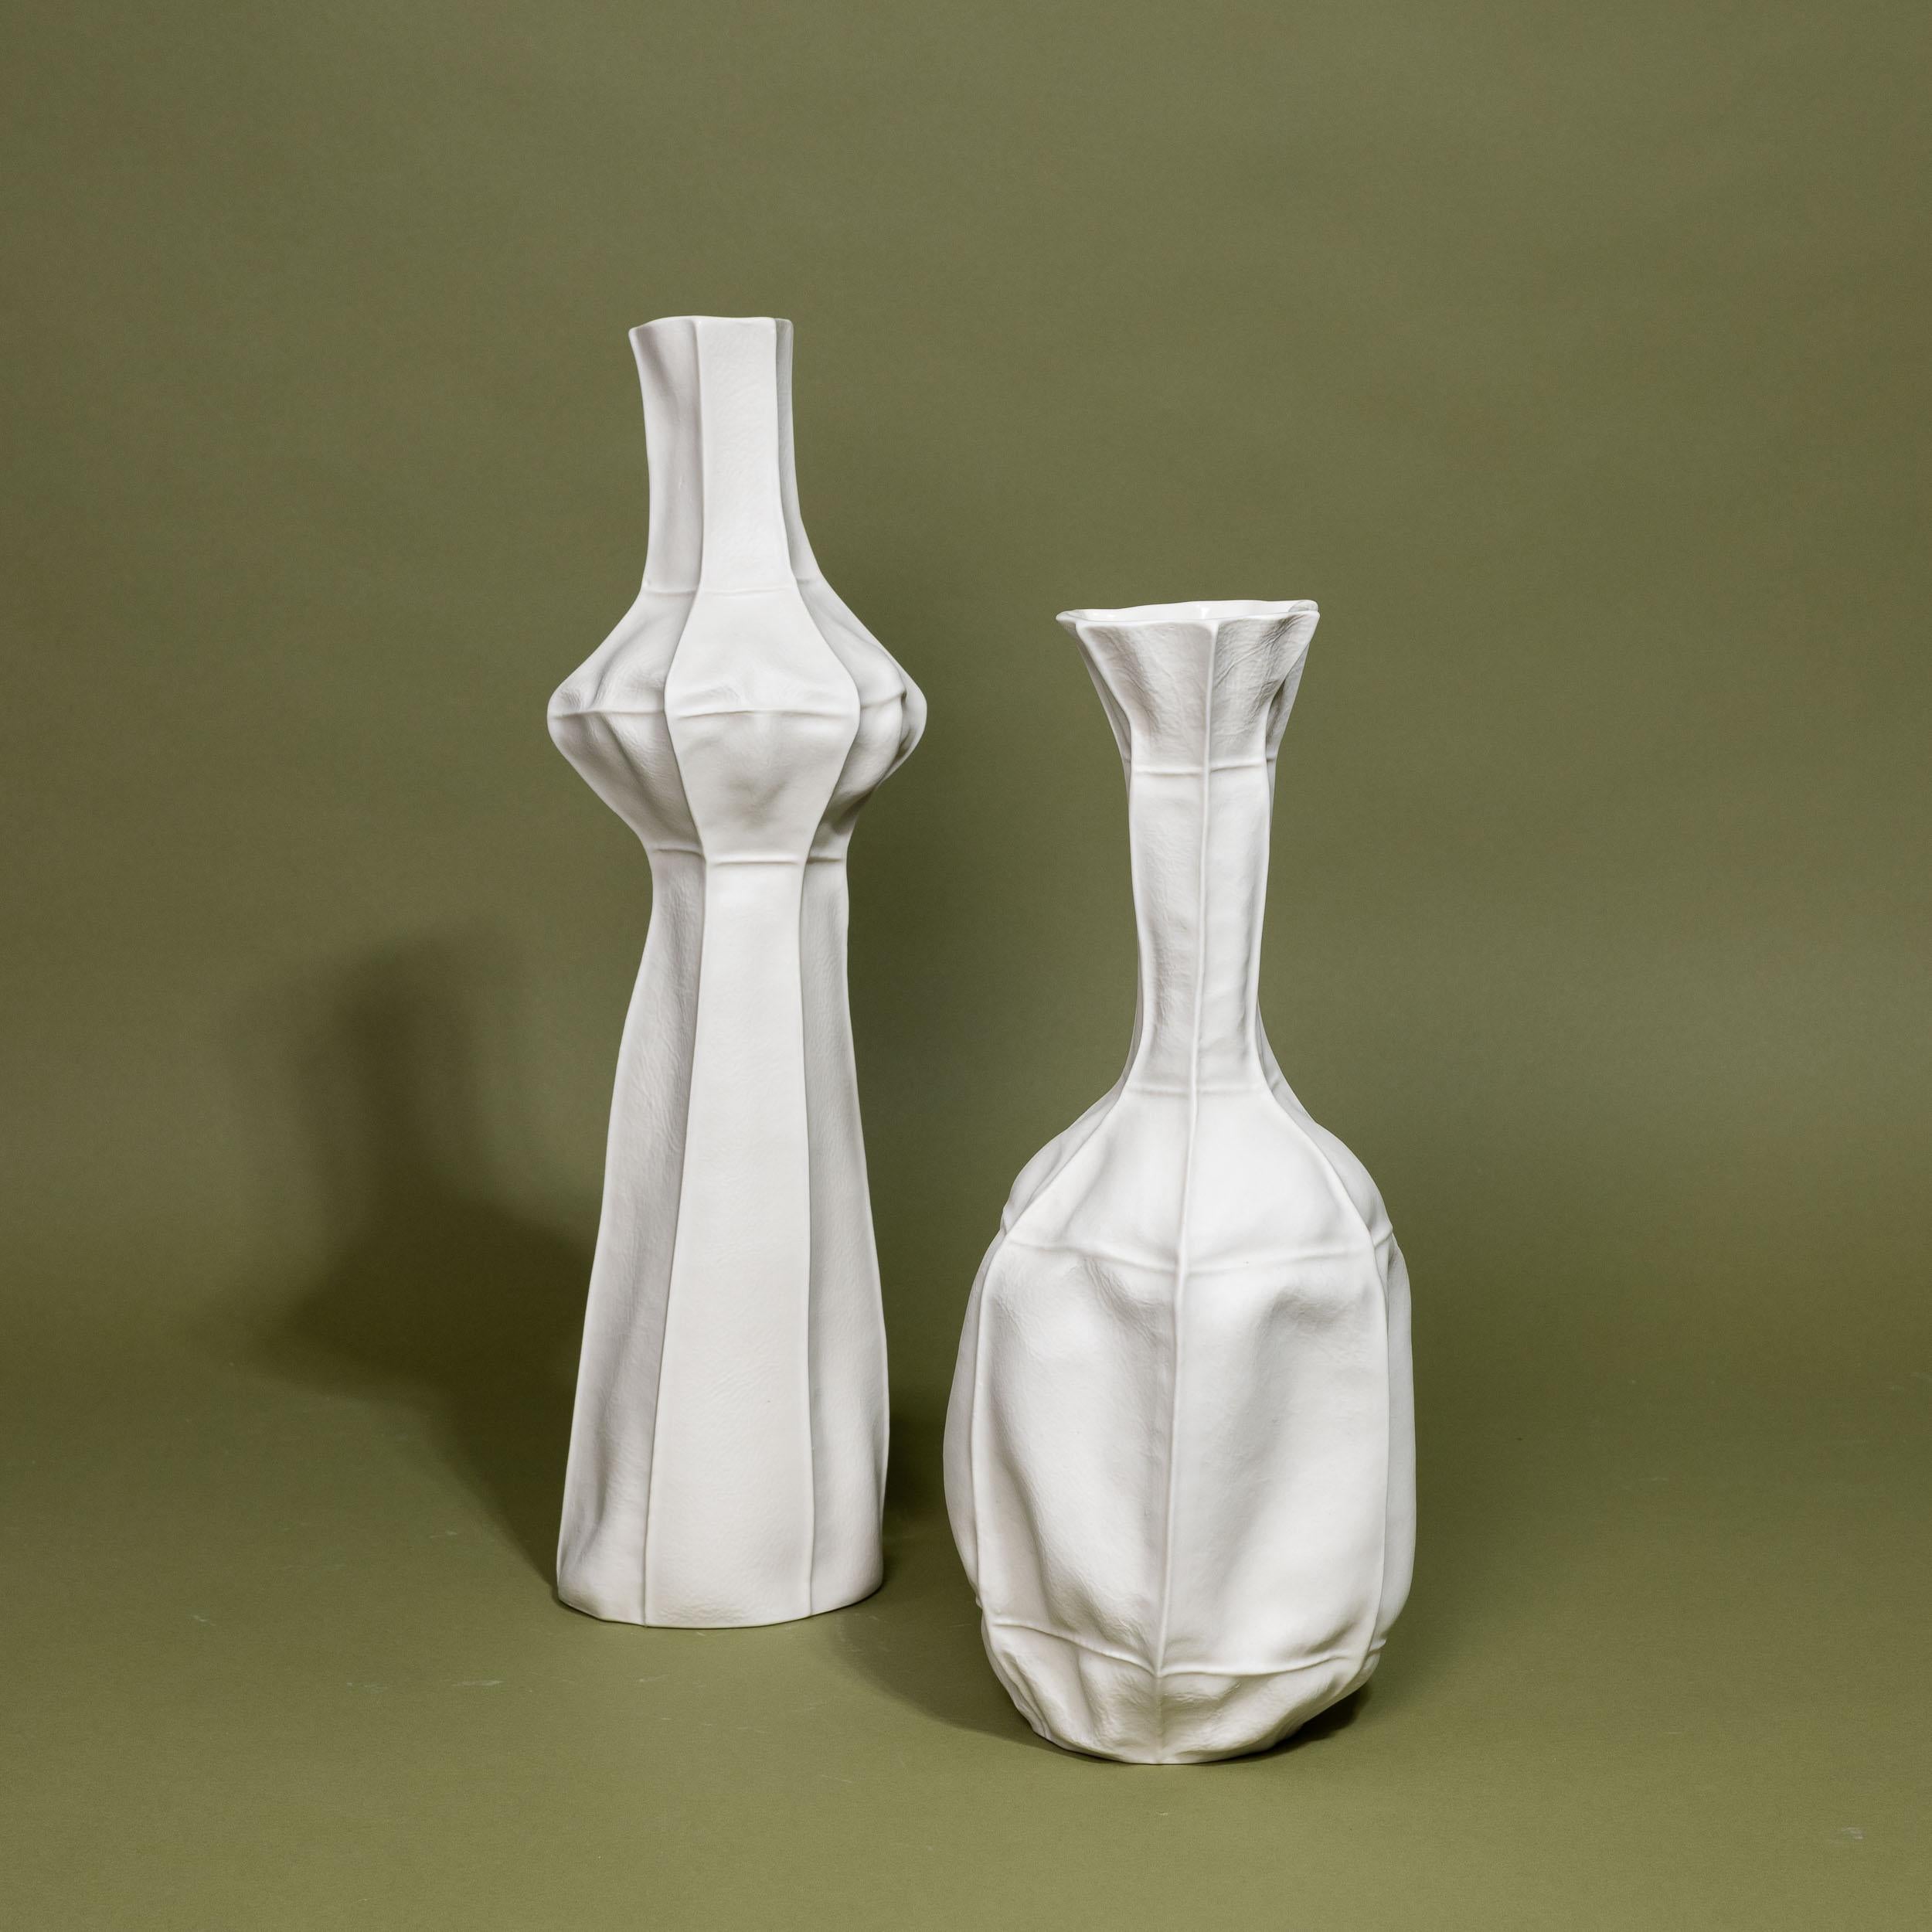 A pair of white porcelain vases made by casting into leather molds. 

As a result of the production process each item is one-of-a-kind. Set includes one tall vase and one medium vase. 

The vases are watertight.

Tall Vase: 5.5